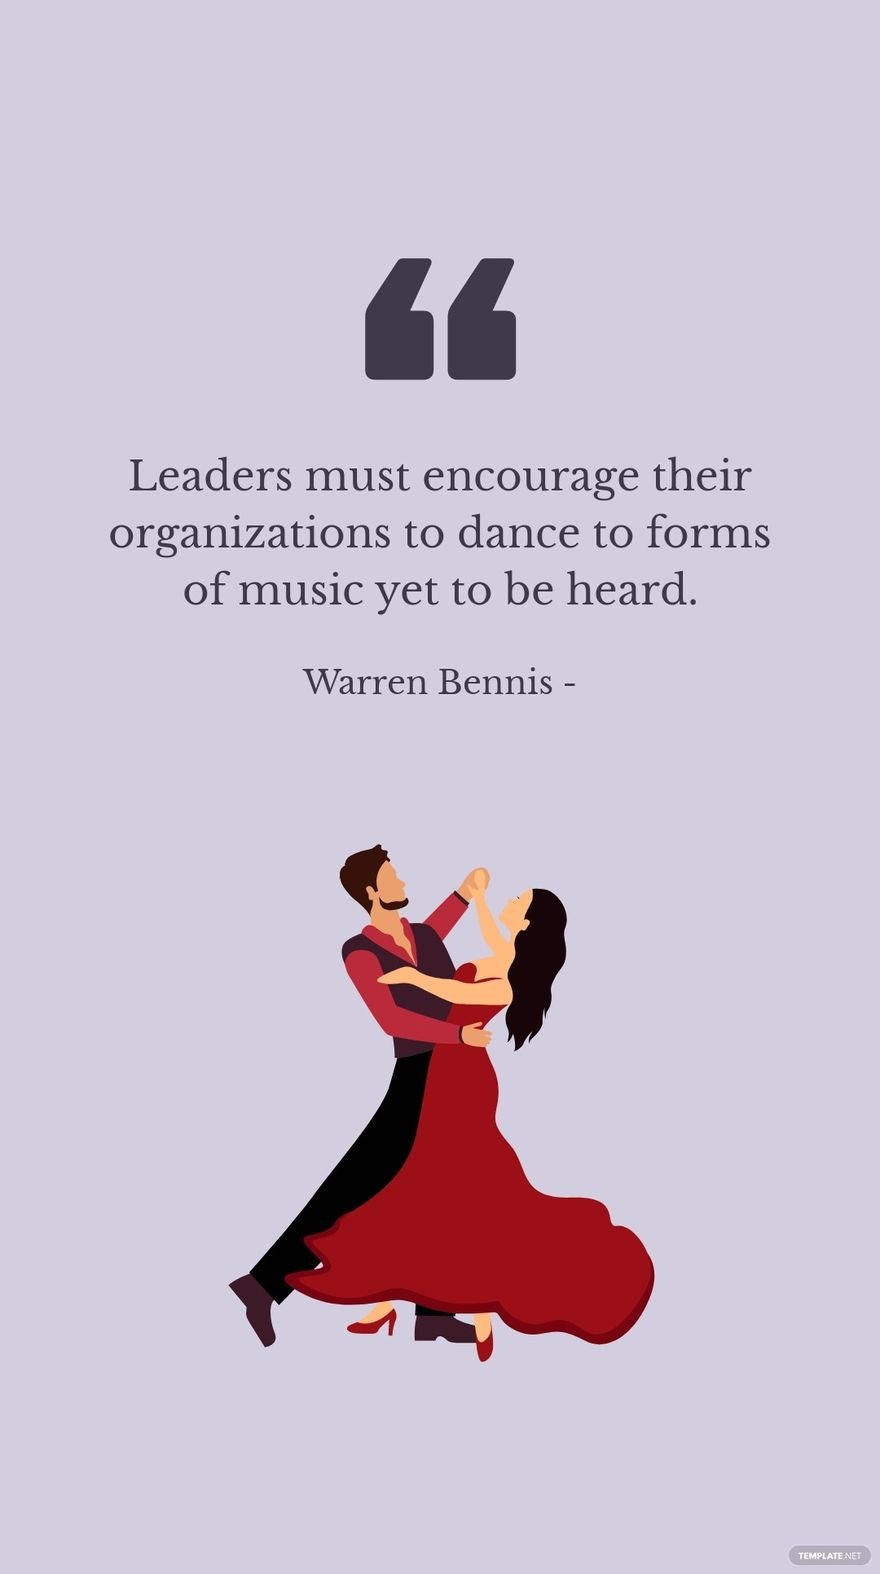 Free Warren Bennis - Leaders must encourage their organizations to dance to forms of music yet to be heard. in JPG